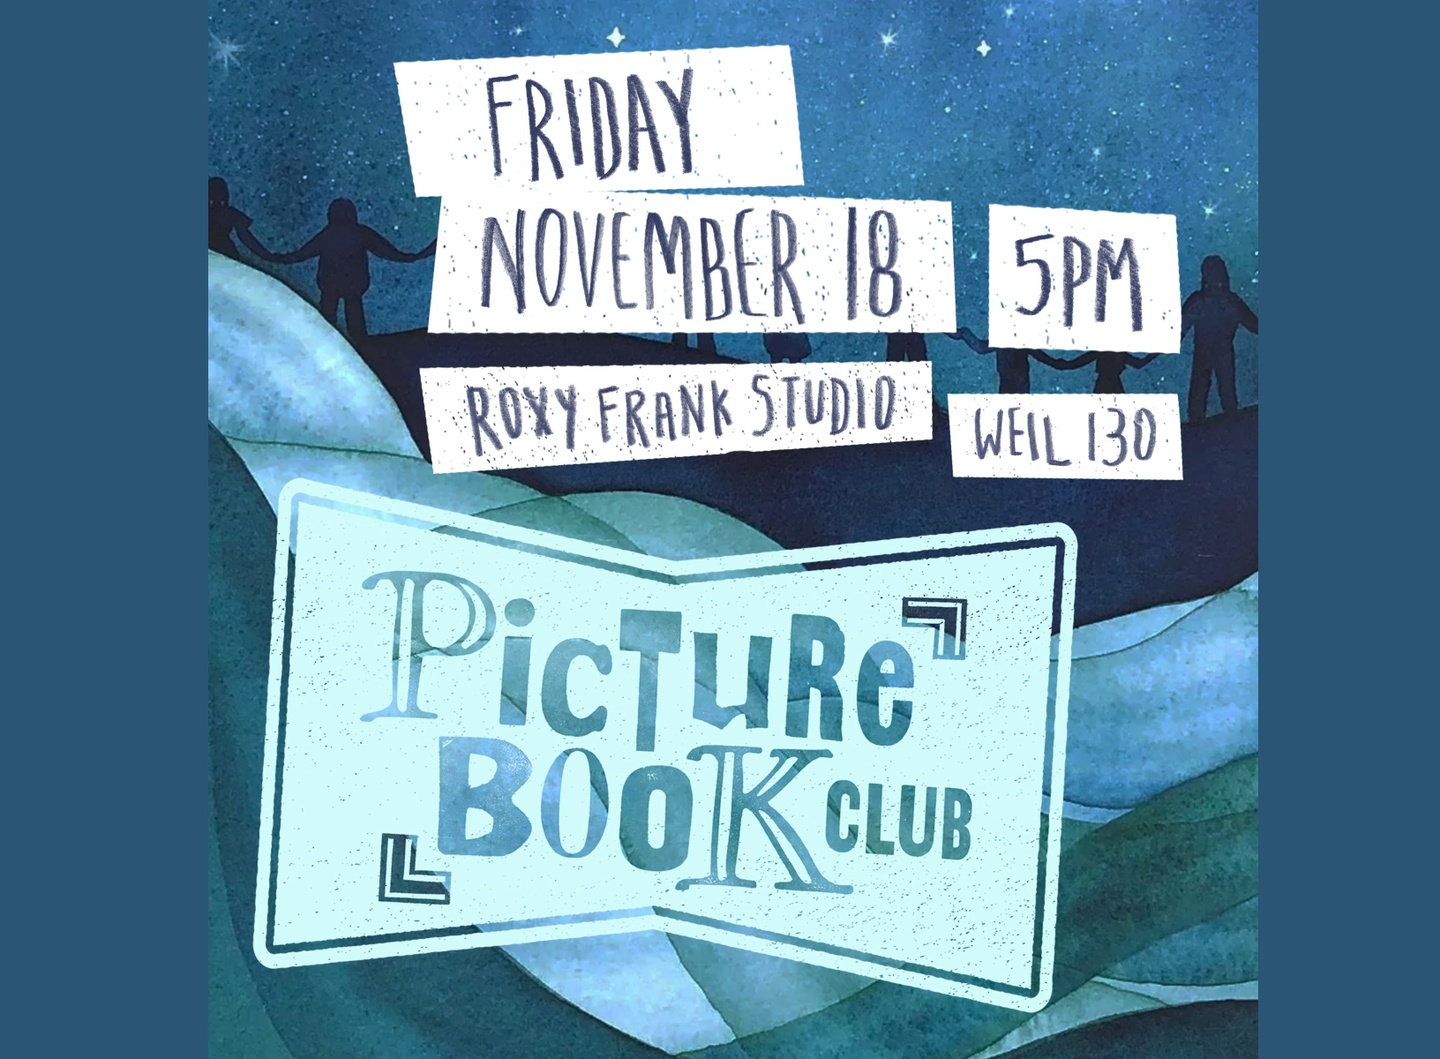 Blue poster with large text depicting PICTURE BOOK CLUB with venue and time information